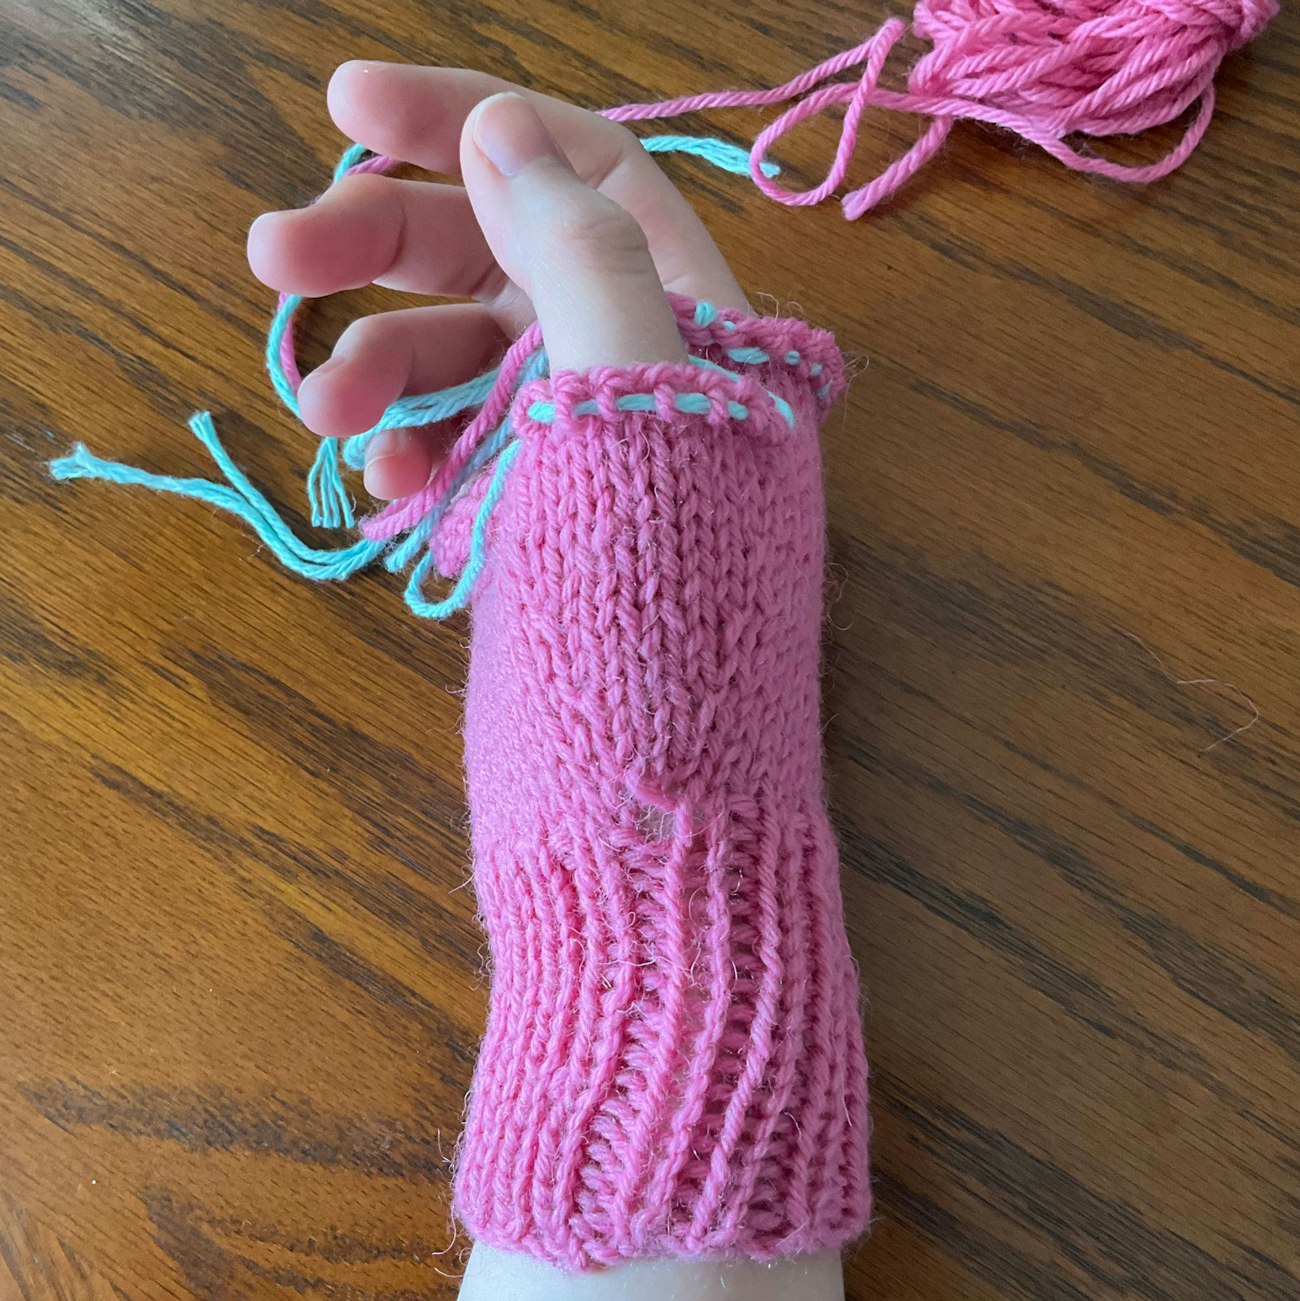 Pink mitten in process with stitches held on waste yarn